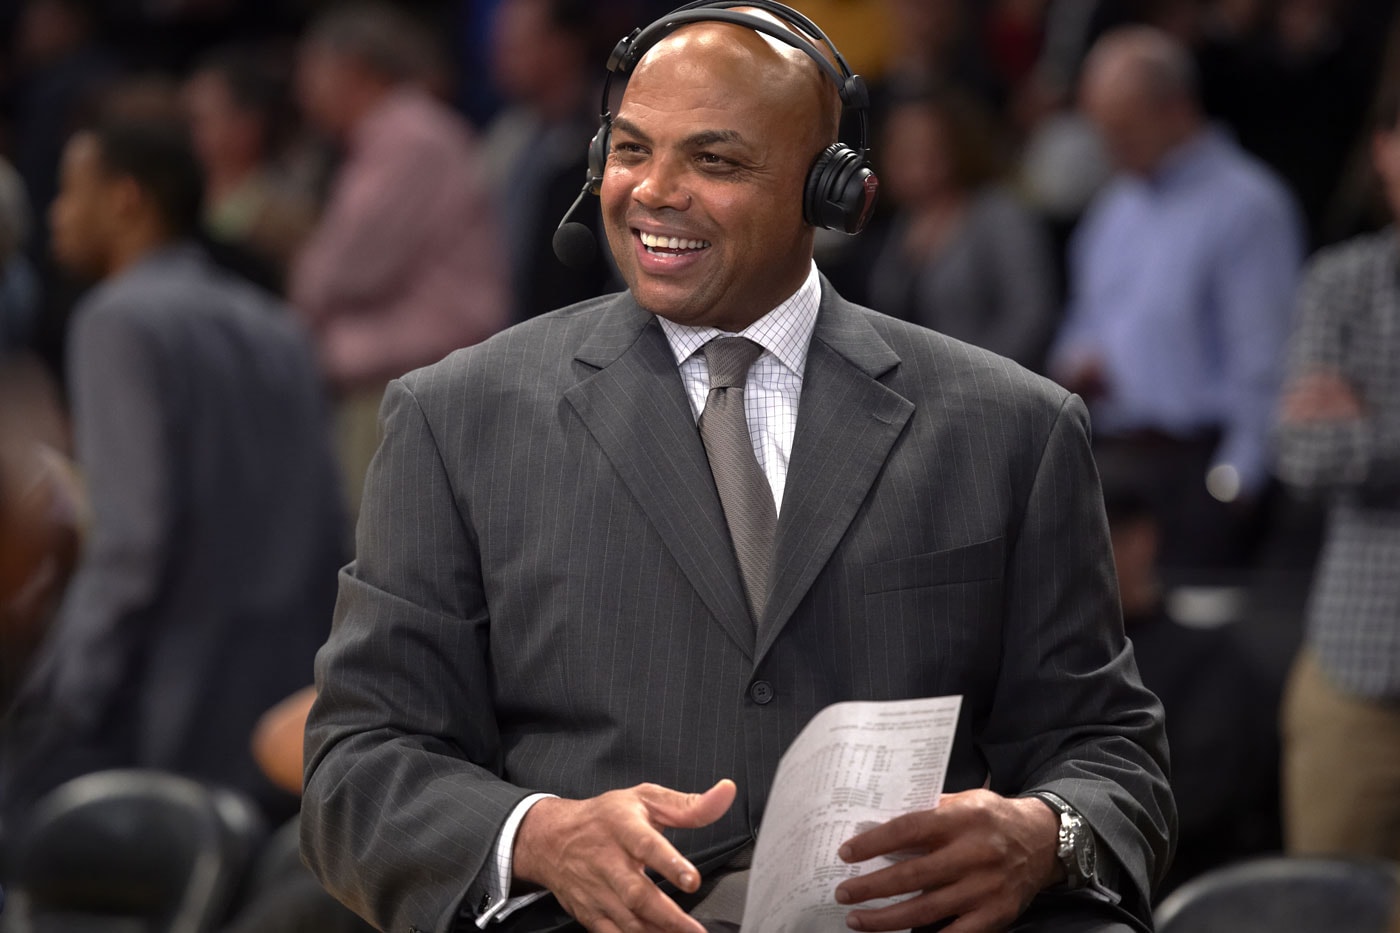 Charles Barkley New TNT 10 year Contract 200 million USD pay reports